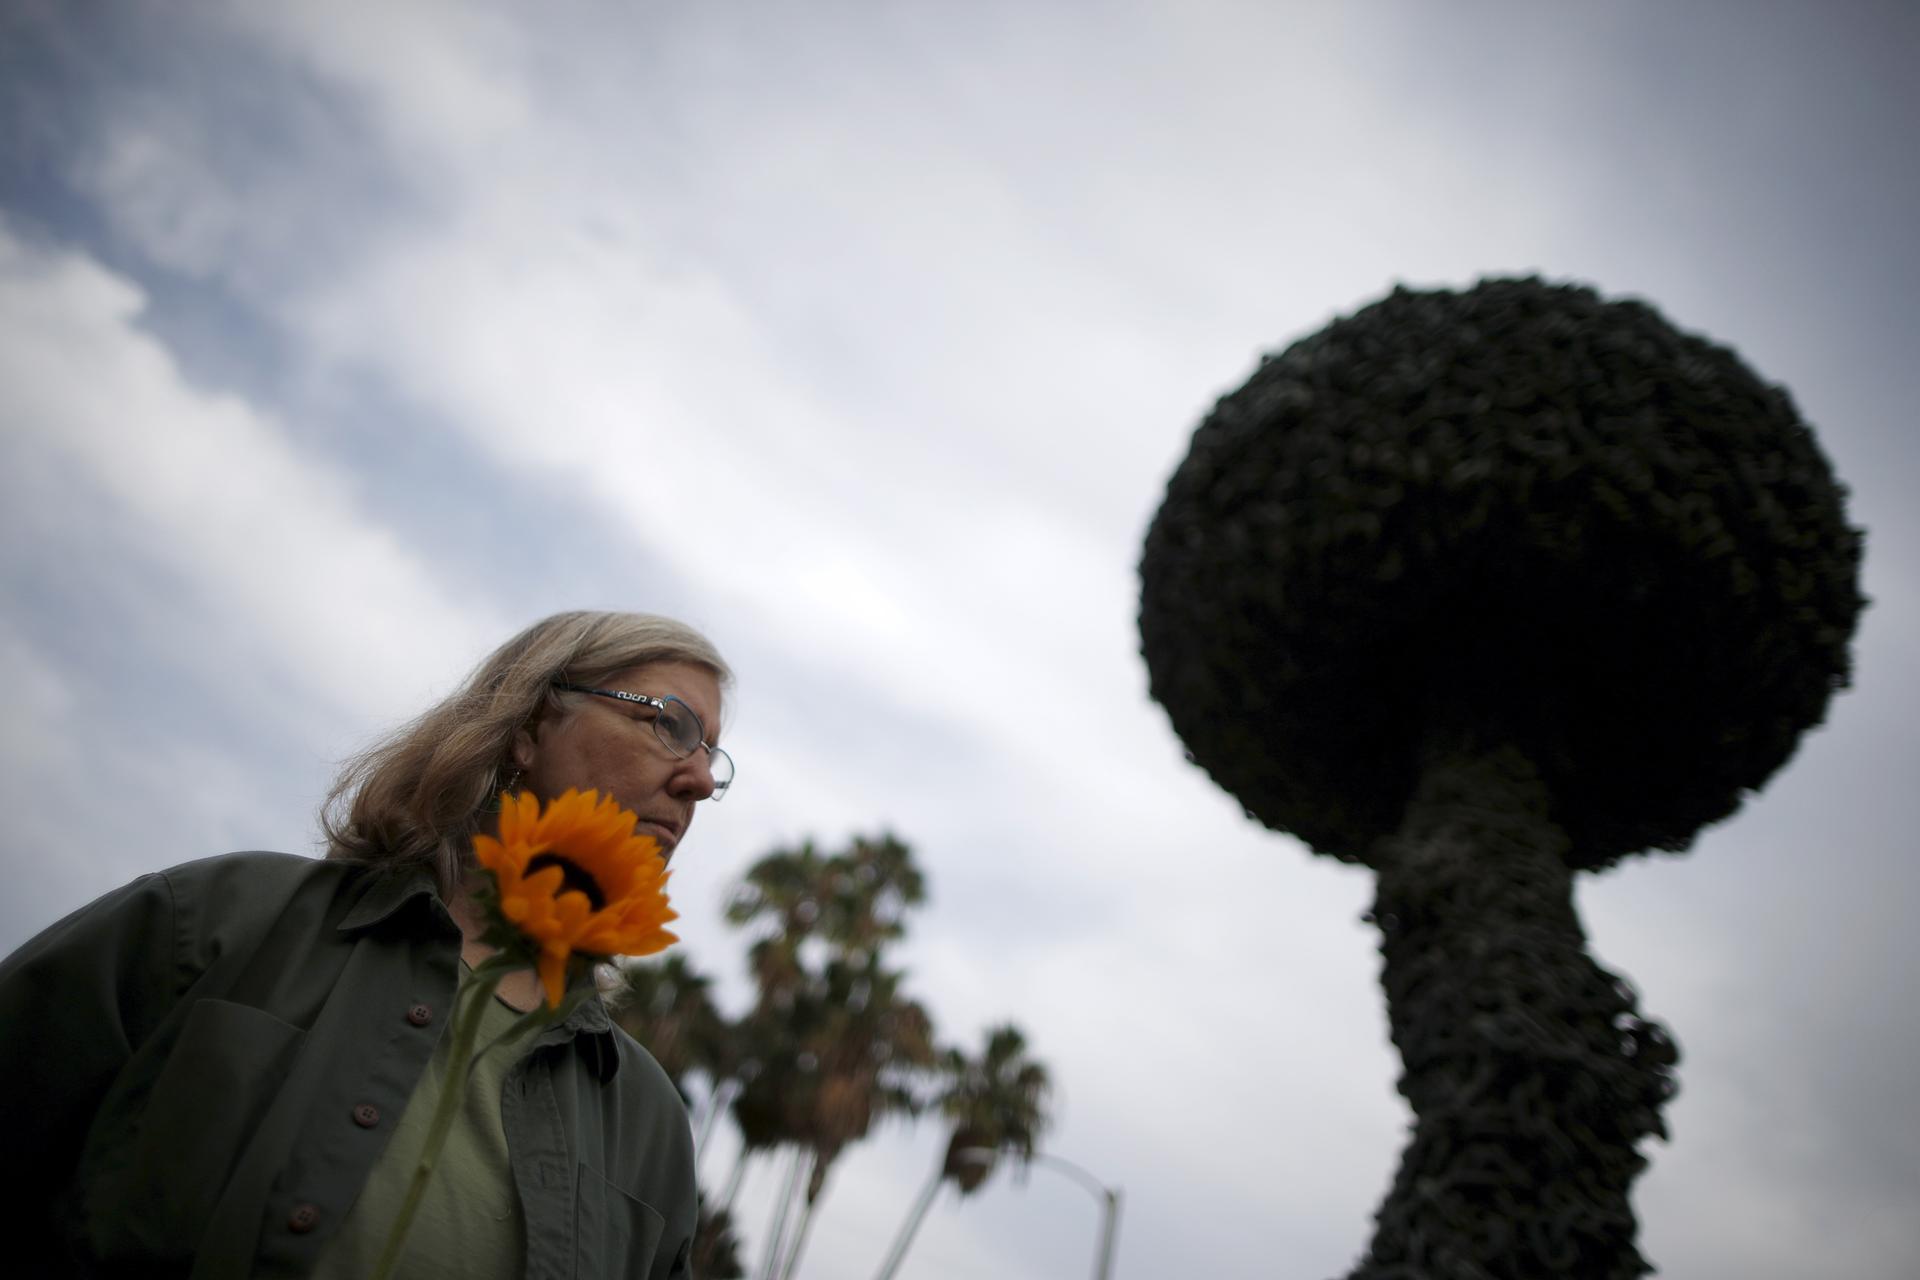 Patricia Todd, 61, holds a sunflower at a peace vigil in front of "Chain Reaction," a mushroom cloud sculpture created by Paul Conrad as a symbol of a world free of nuclear weapons, in Santa Monica, California, United States, September 21, 2015. 